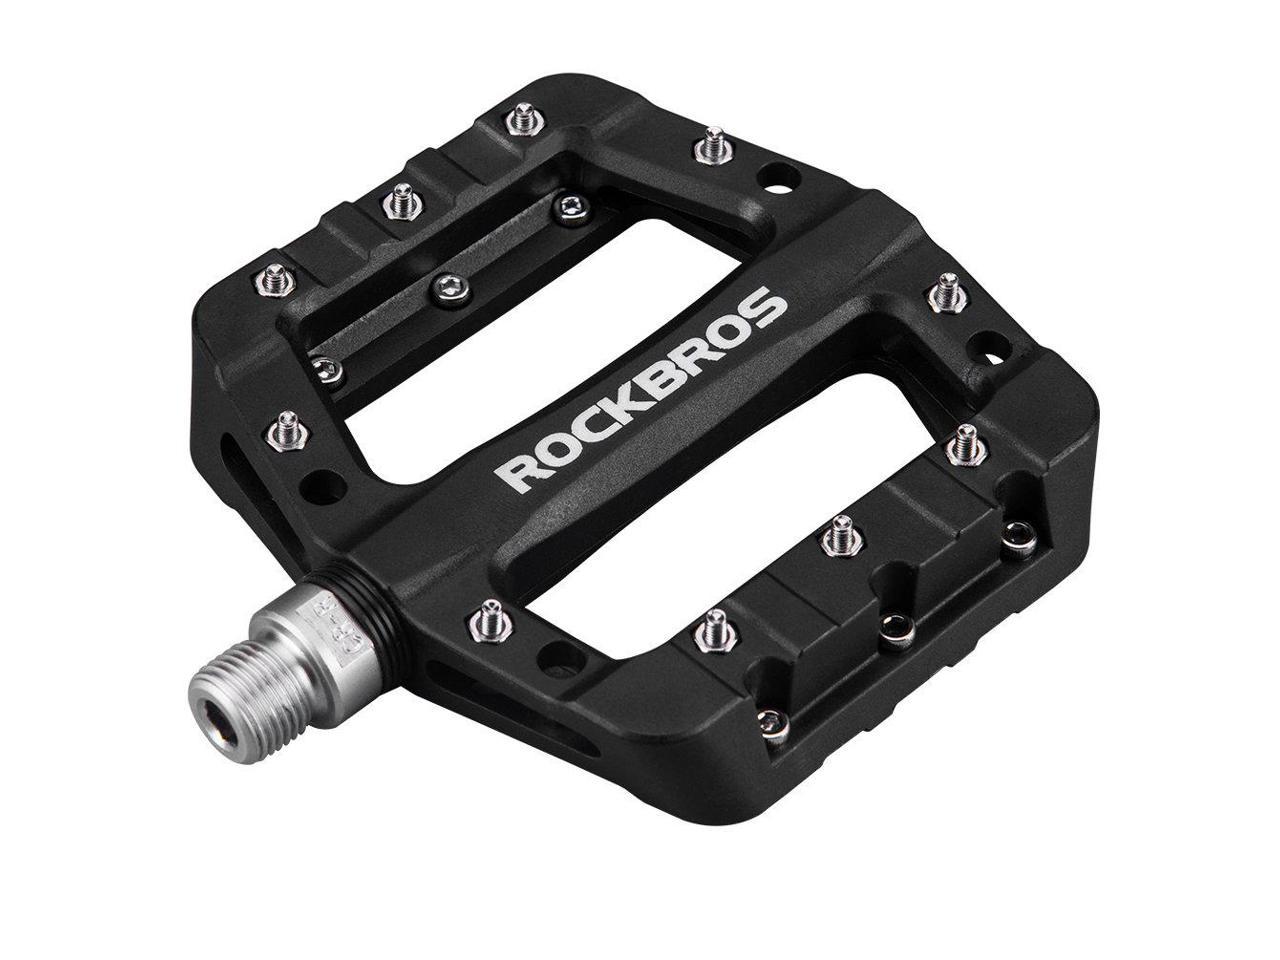 MTB Road Bike Lightweight Bicycle Pedal Universal Replacement Pedals 9/16" 